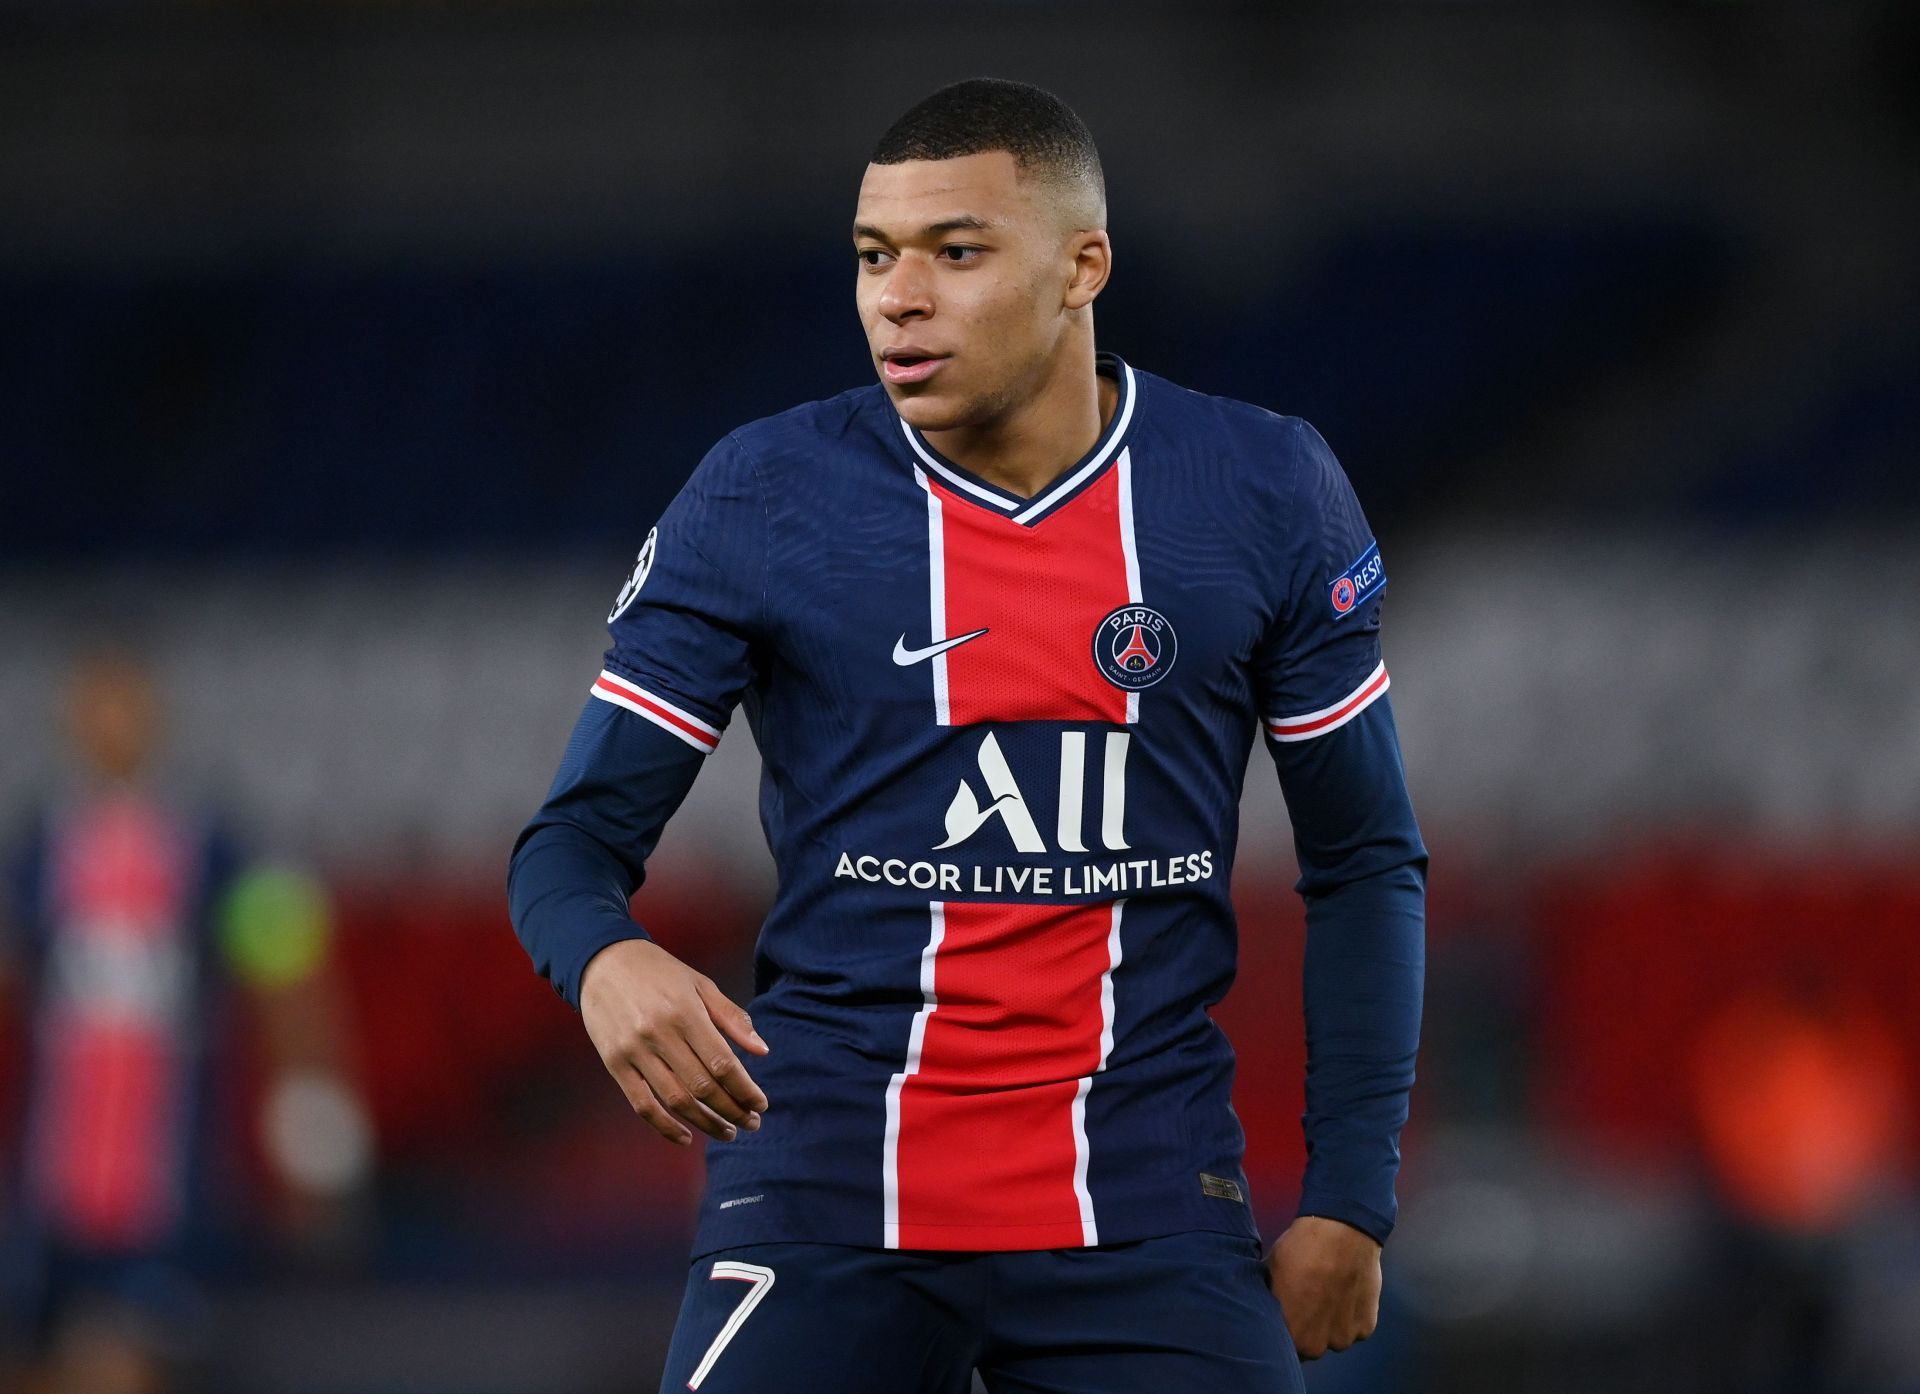 Mbappe is playing his 5th season with PSG